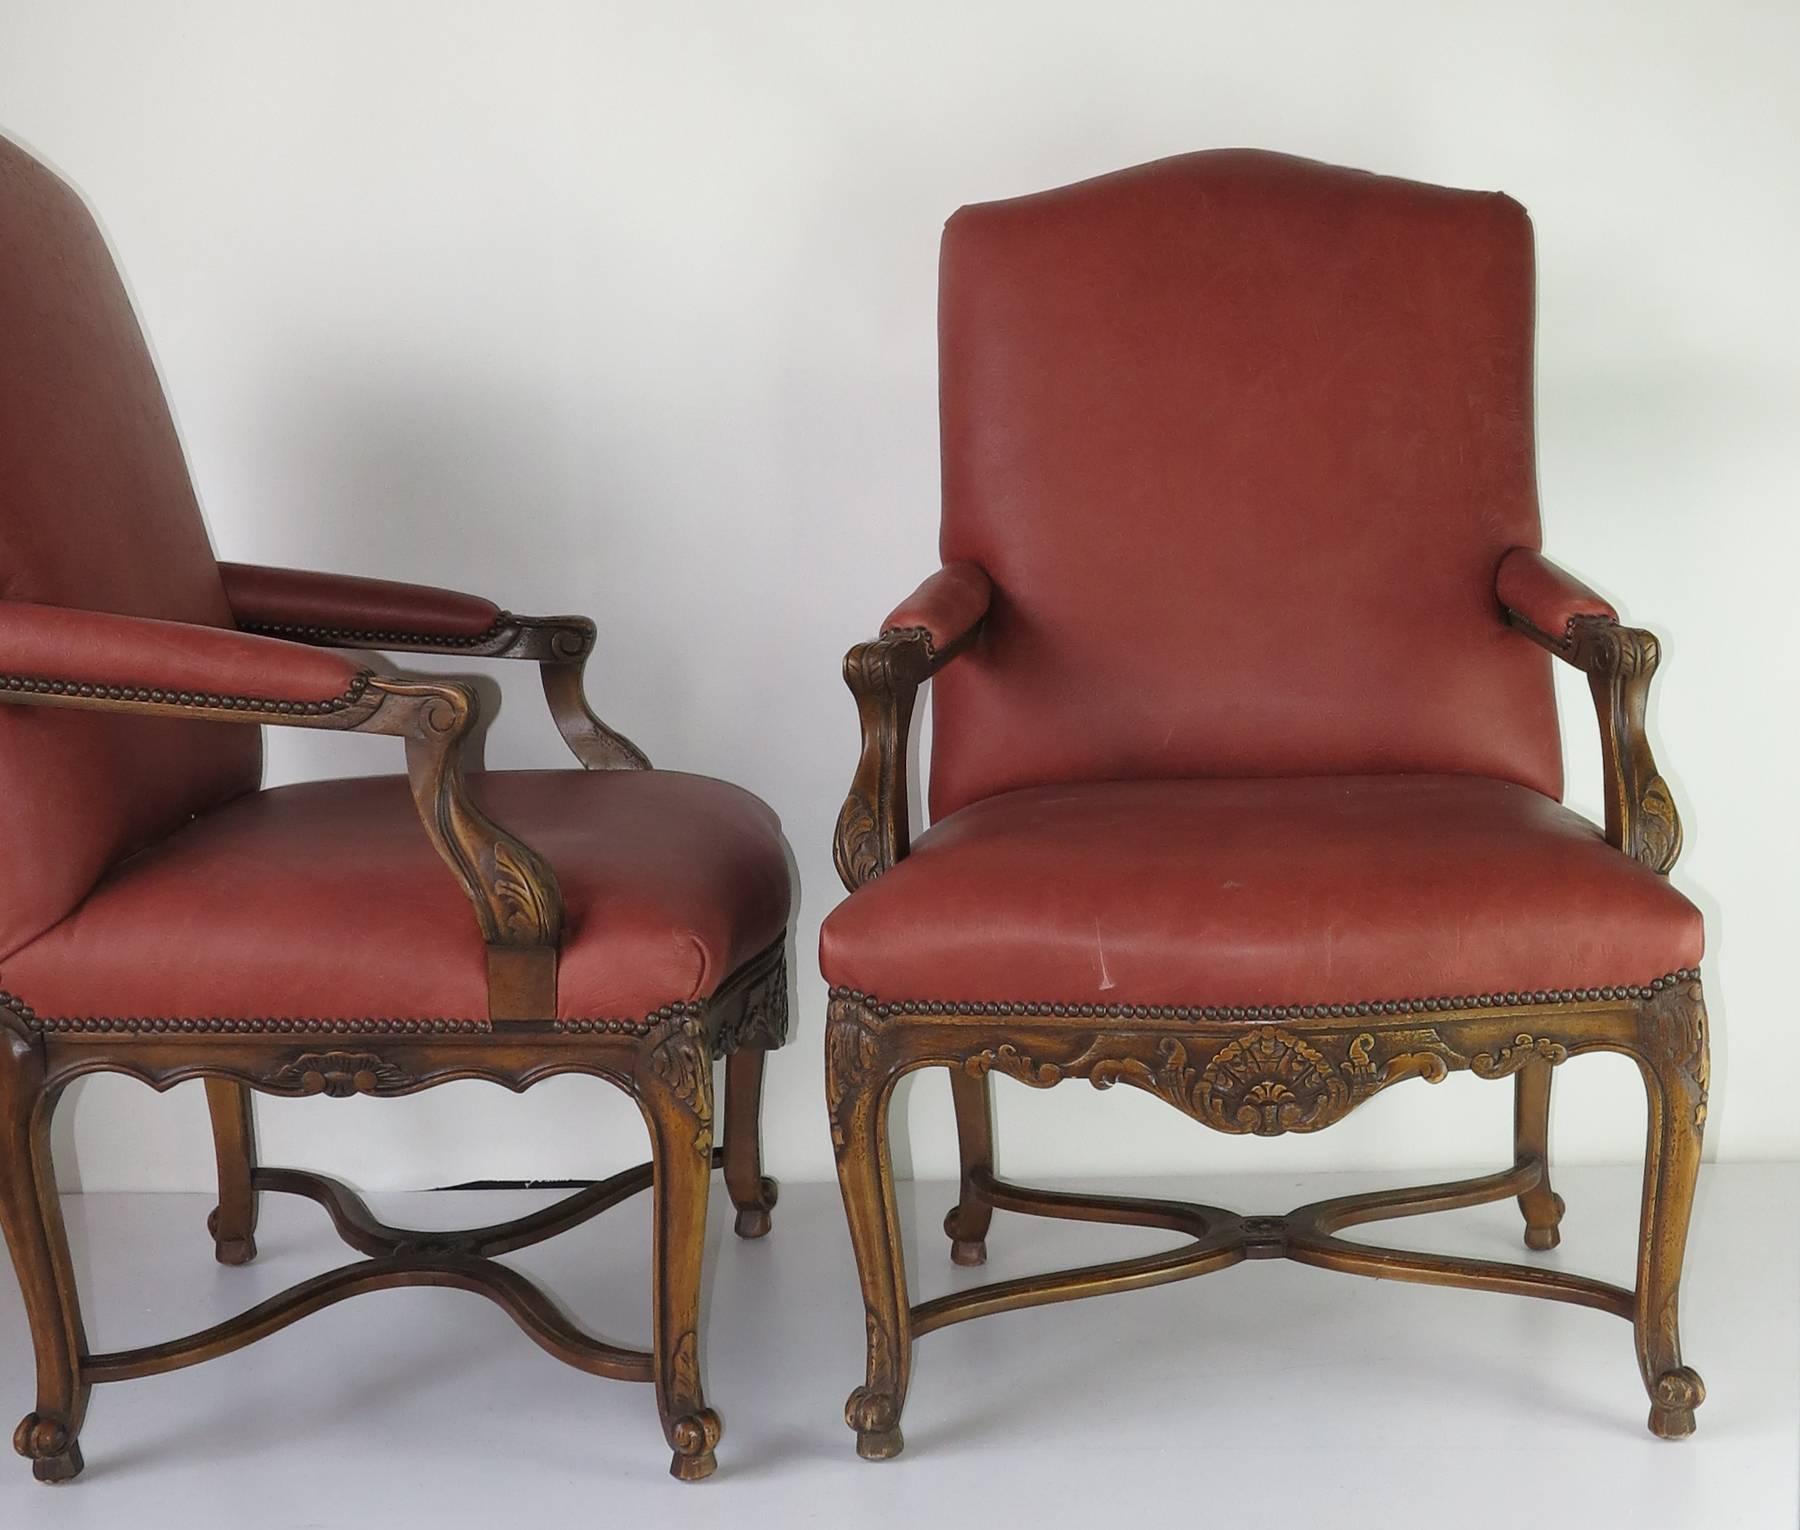 Red embossed  arm chairs Chairs. Louis xiv style chairs with carved aprons.